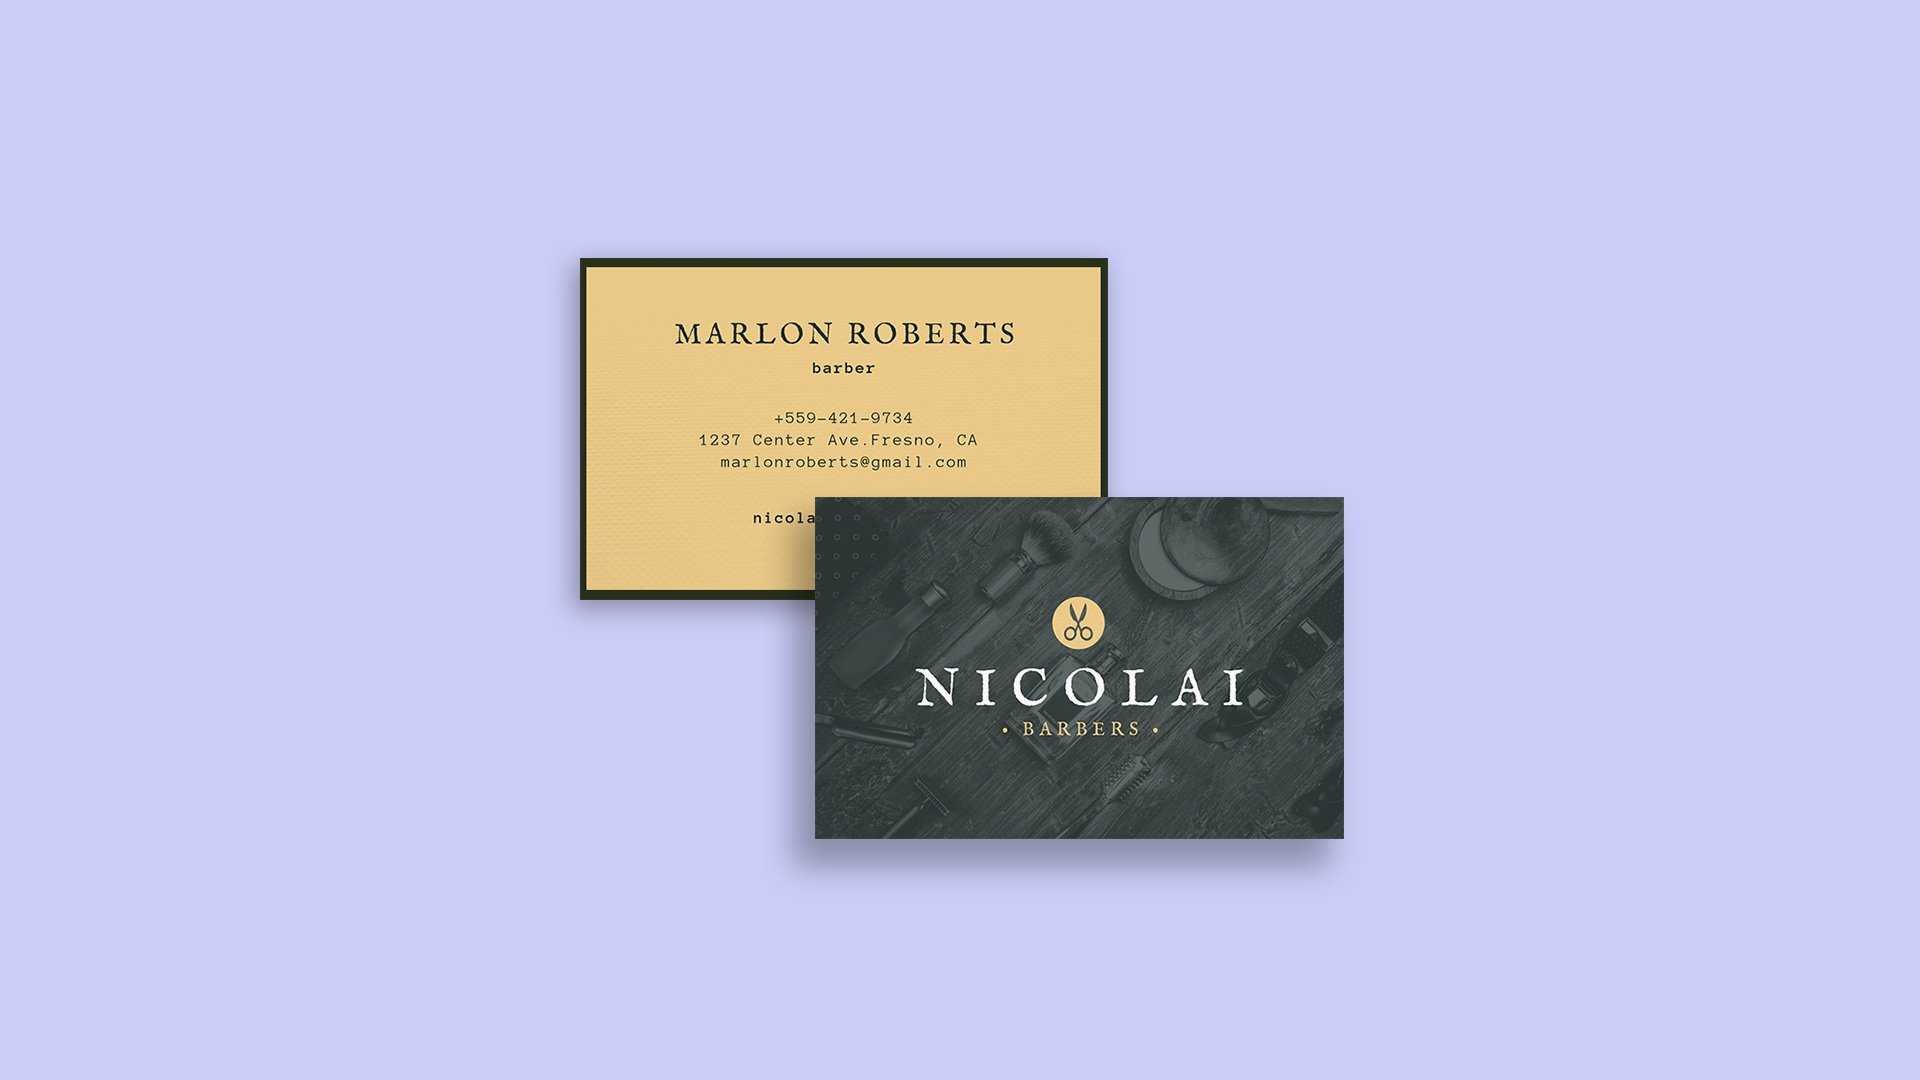 World's Most Famous People Business Cards – Learn Throughout Freelance Business Card Template